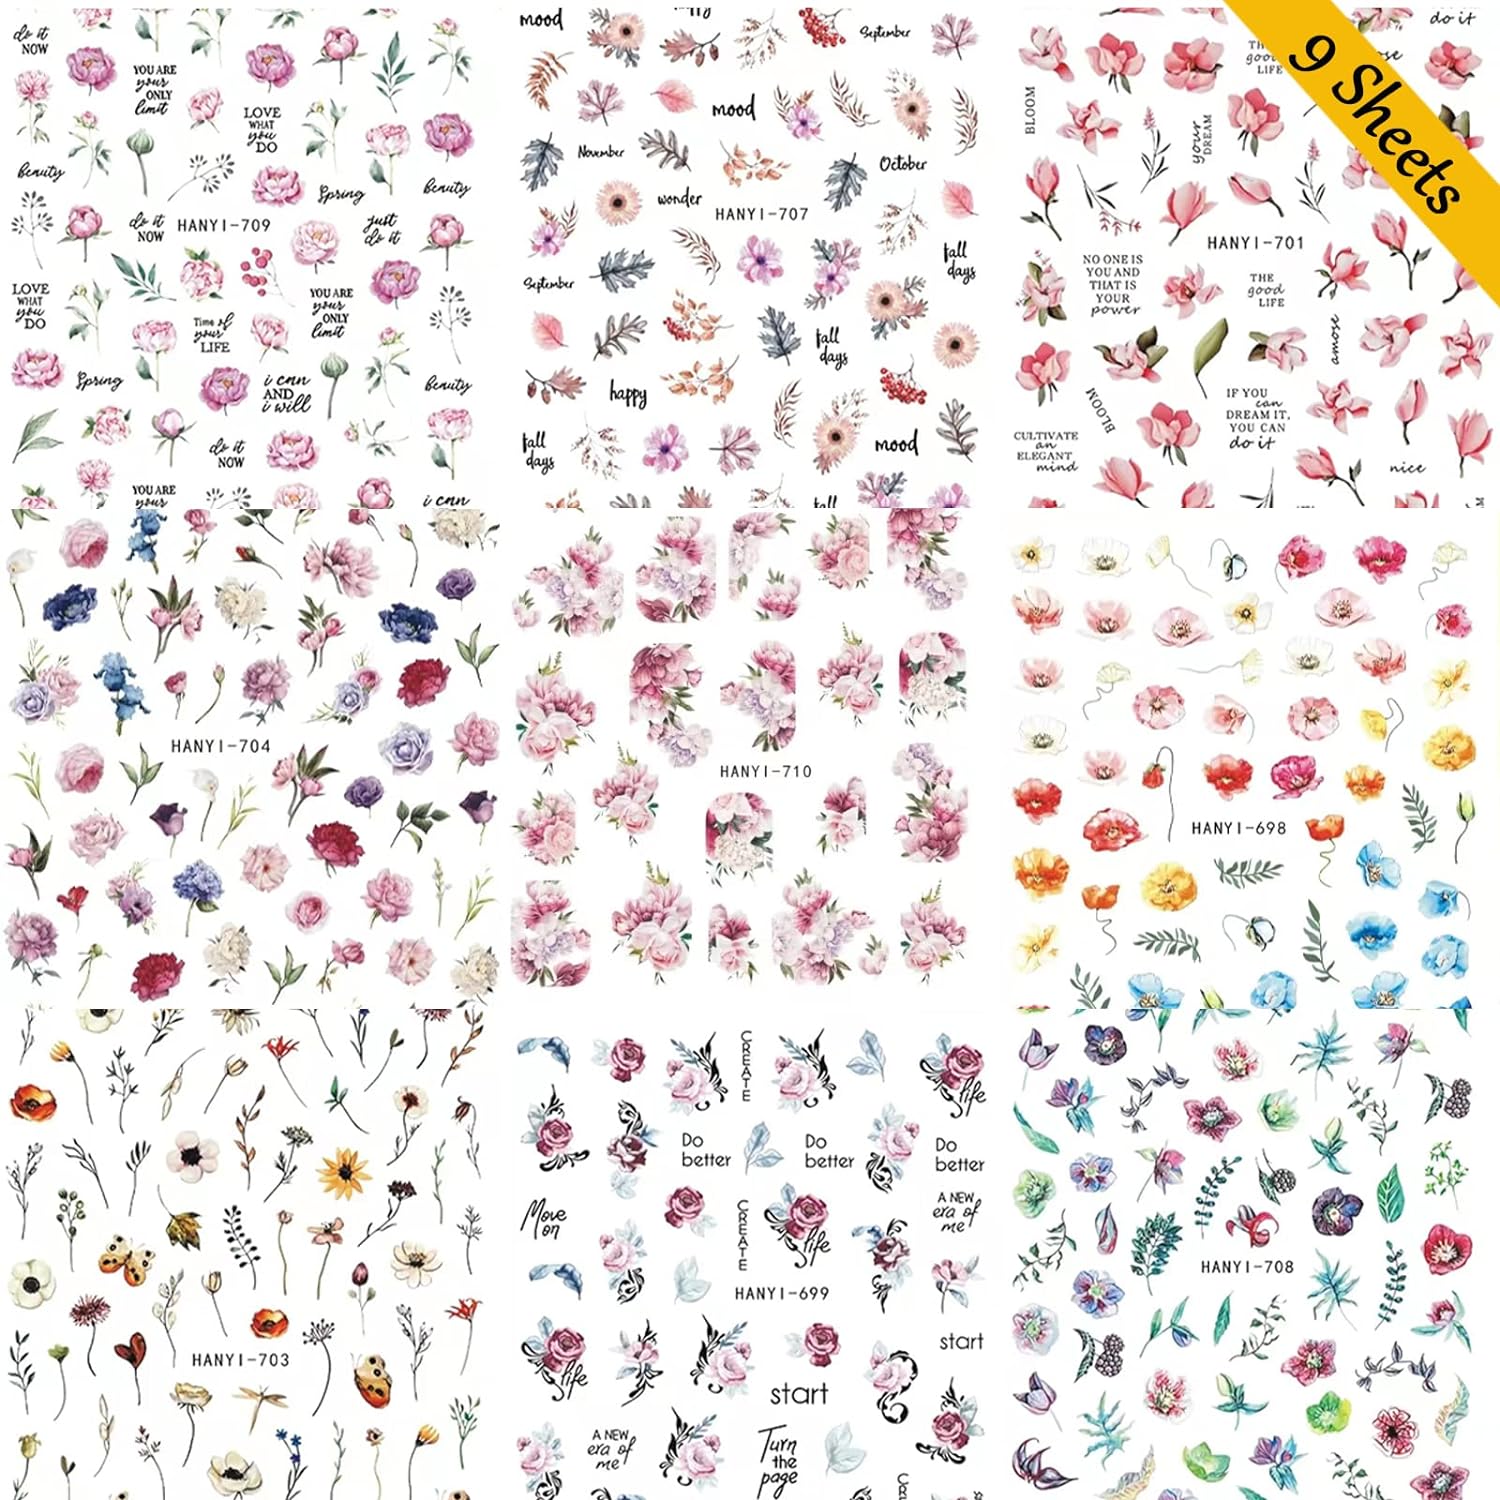 9 Sheets Flower Nail Art Stickers Decals 3D Self-Adhesive Nail Decals Spring Floral Nail Art Supplies Charming Daisy Leave Peony Nail Accessories for Women Nail Decorations Design